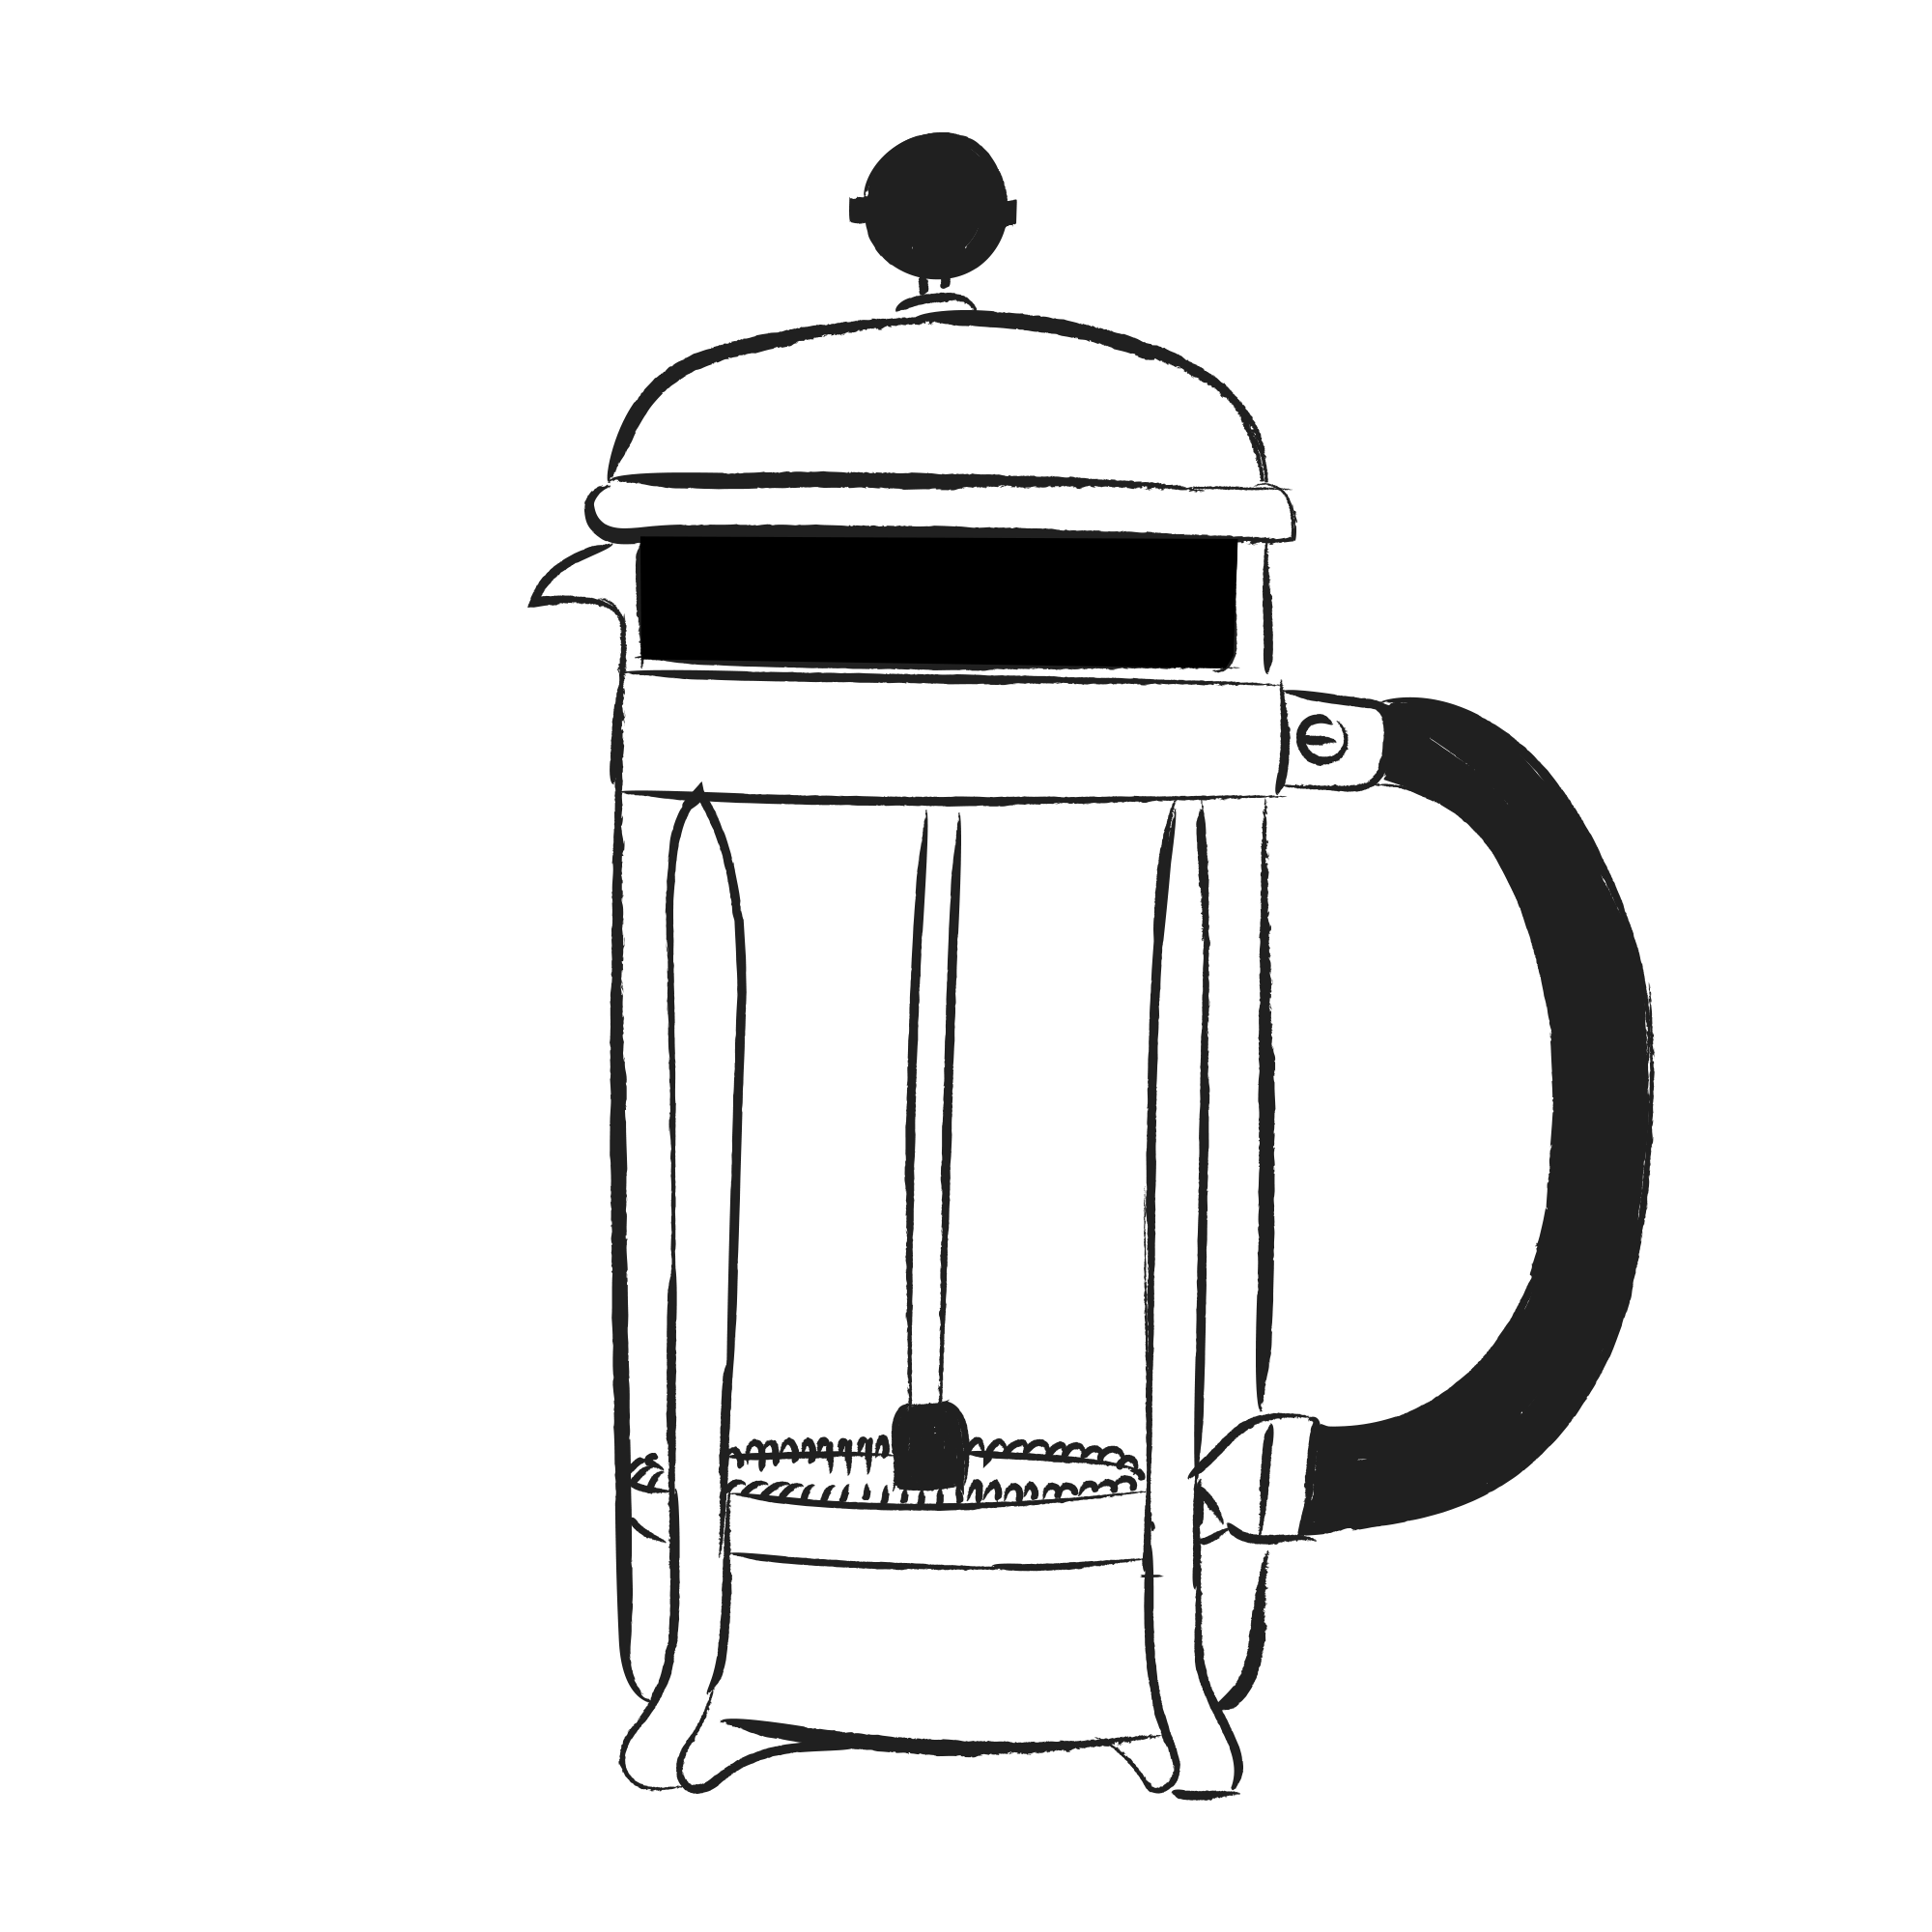 This image FrenchPress_BrewGuide is for visual improvements for page Brew Guides